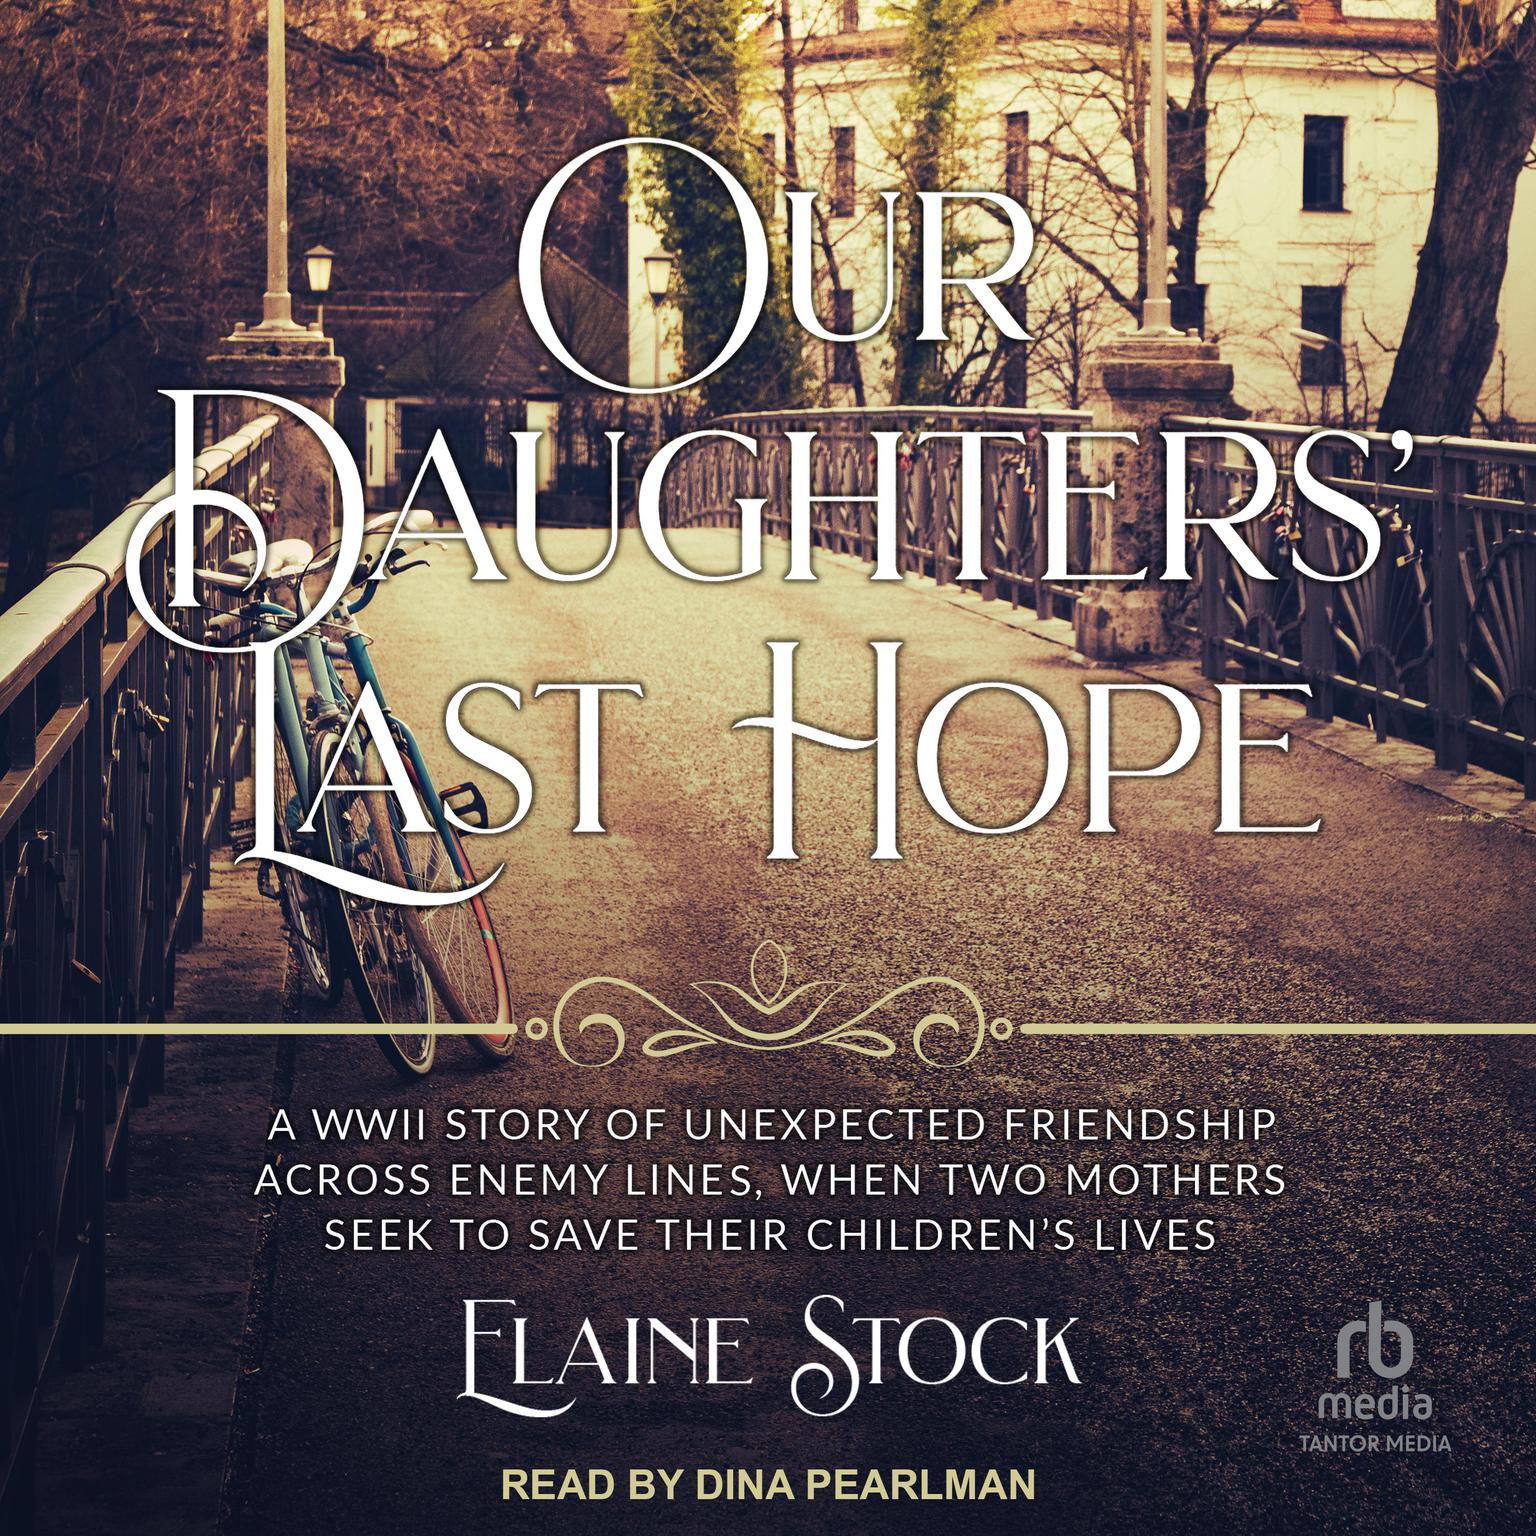 Our Daughters Last Hope: A WWII Story of Unexpected Friendship Across Enemy Lines When Two Mothers Seek to Save Their Children’s Live Audiobook, by Elaine Stock